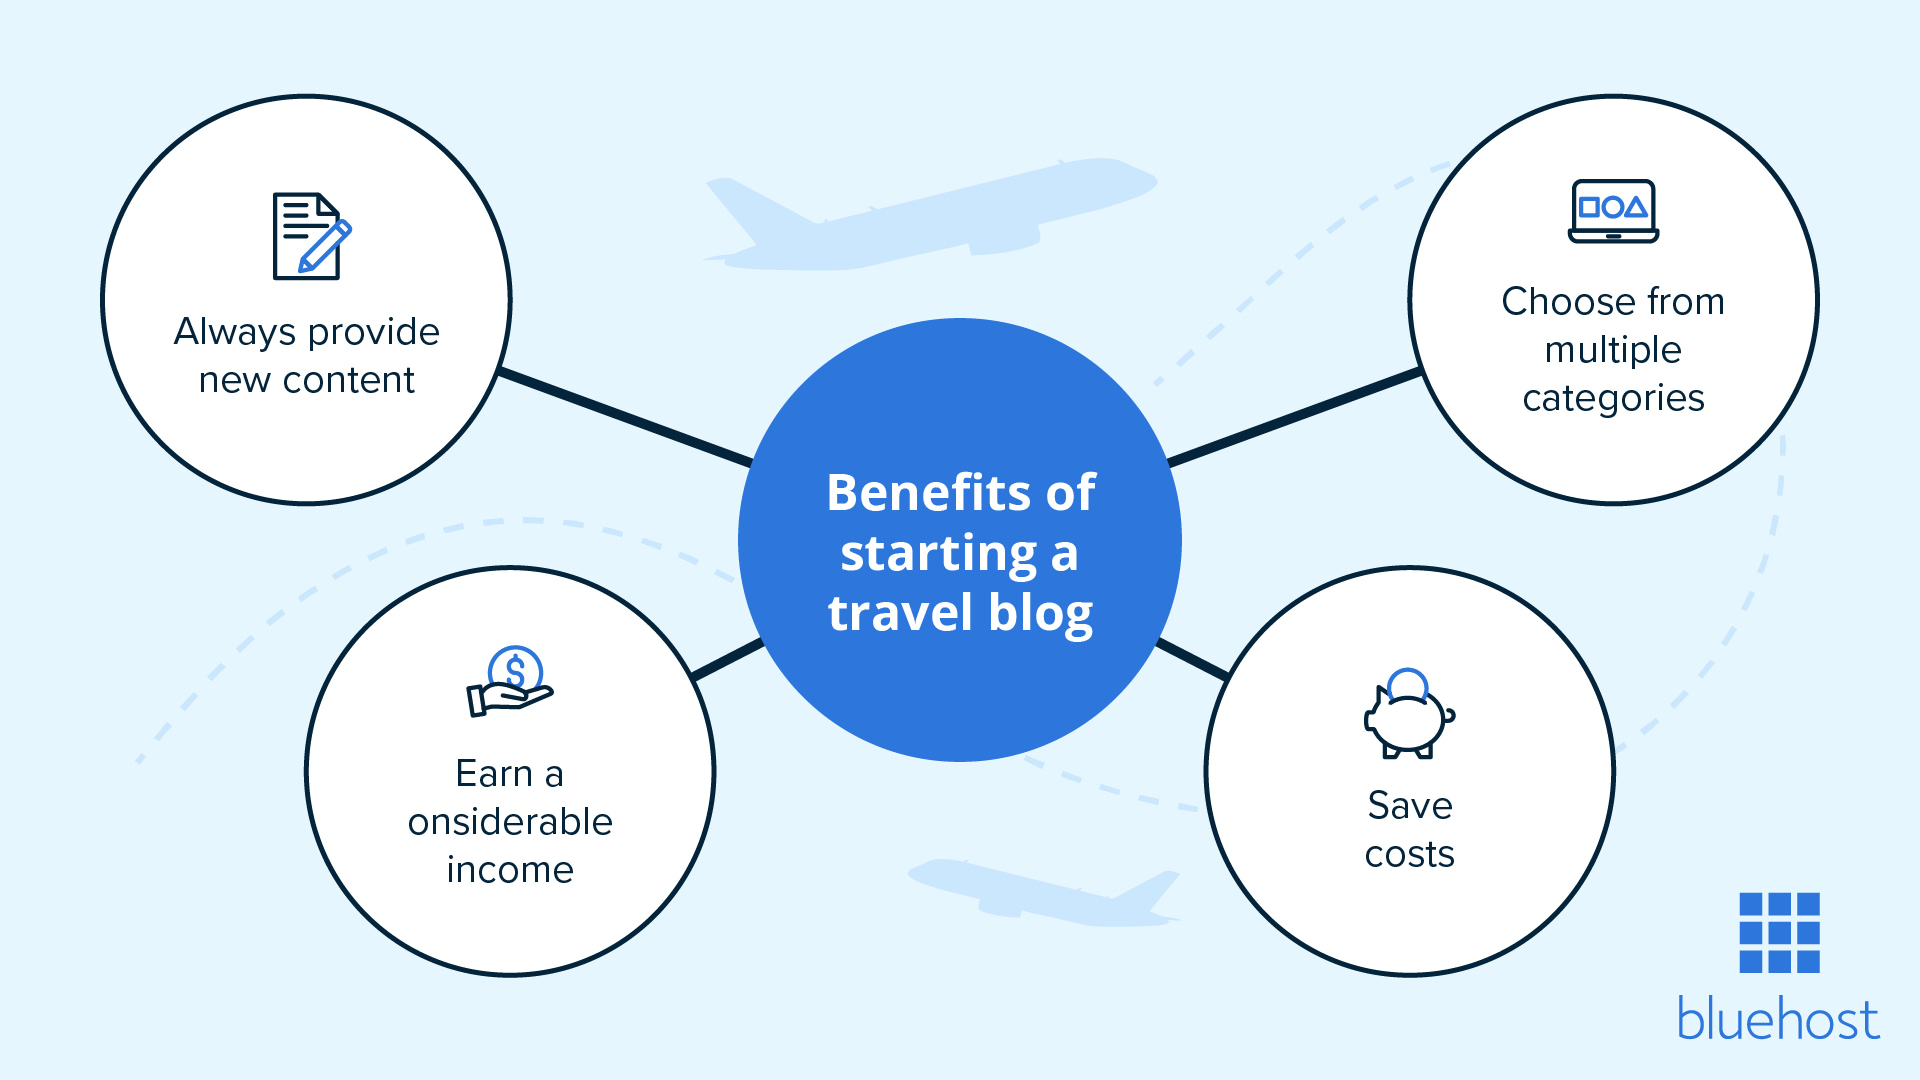 Benefits of starting a travel blog.